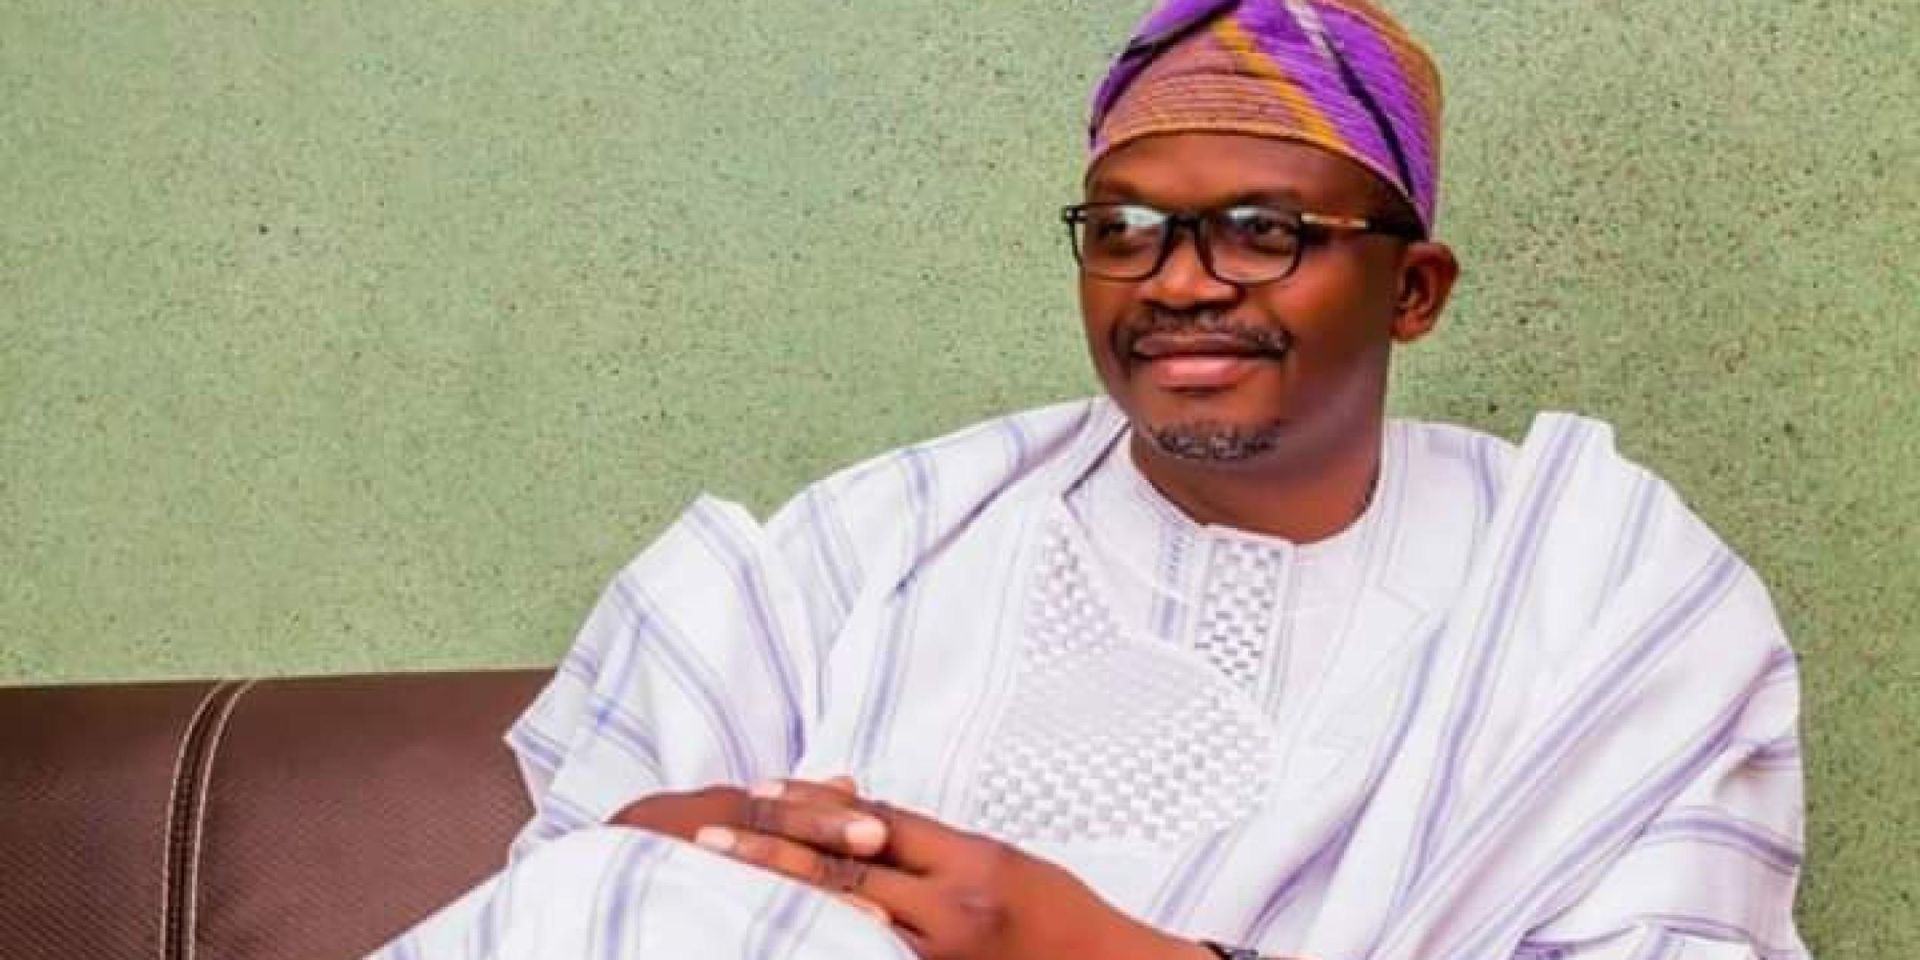 Osun Apc Senatorial Candidate Famurewa Is Detained By Nigerian Police On Suspicion Of Illegally Possessing Firearms, Yours Truly, Top Stories, March 29, 2023